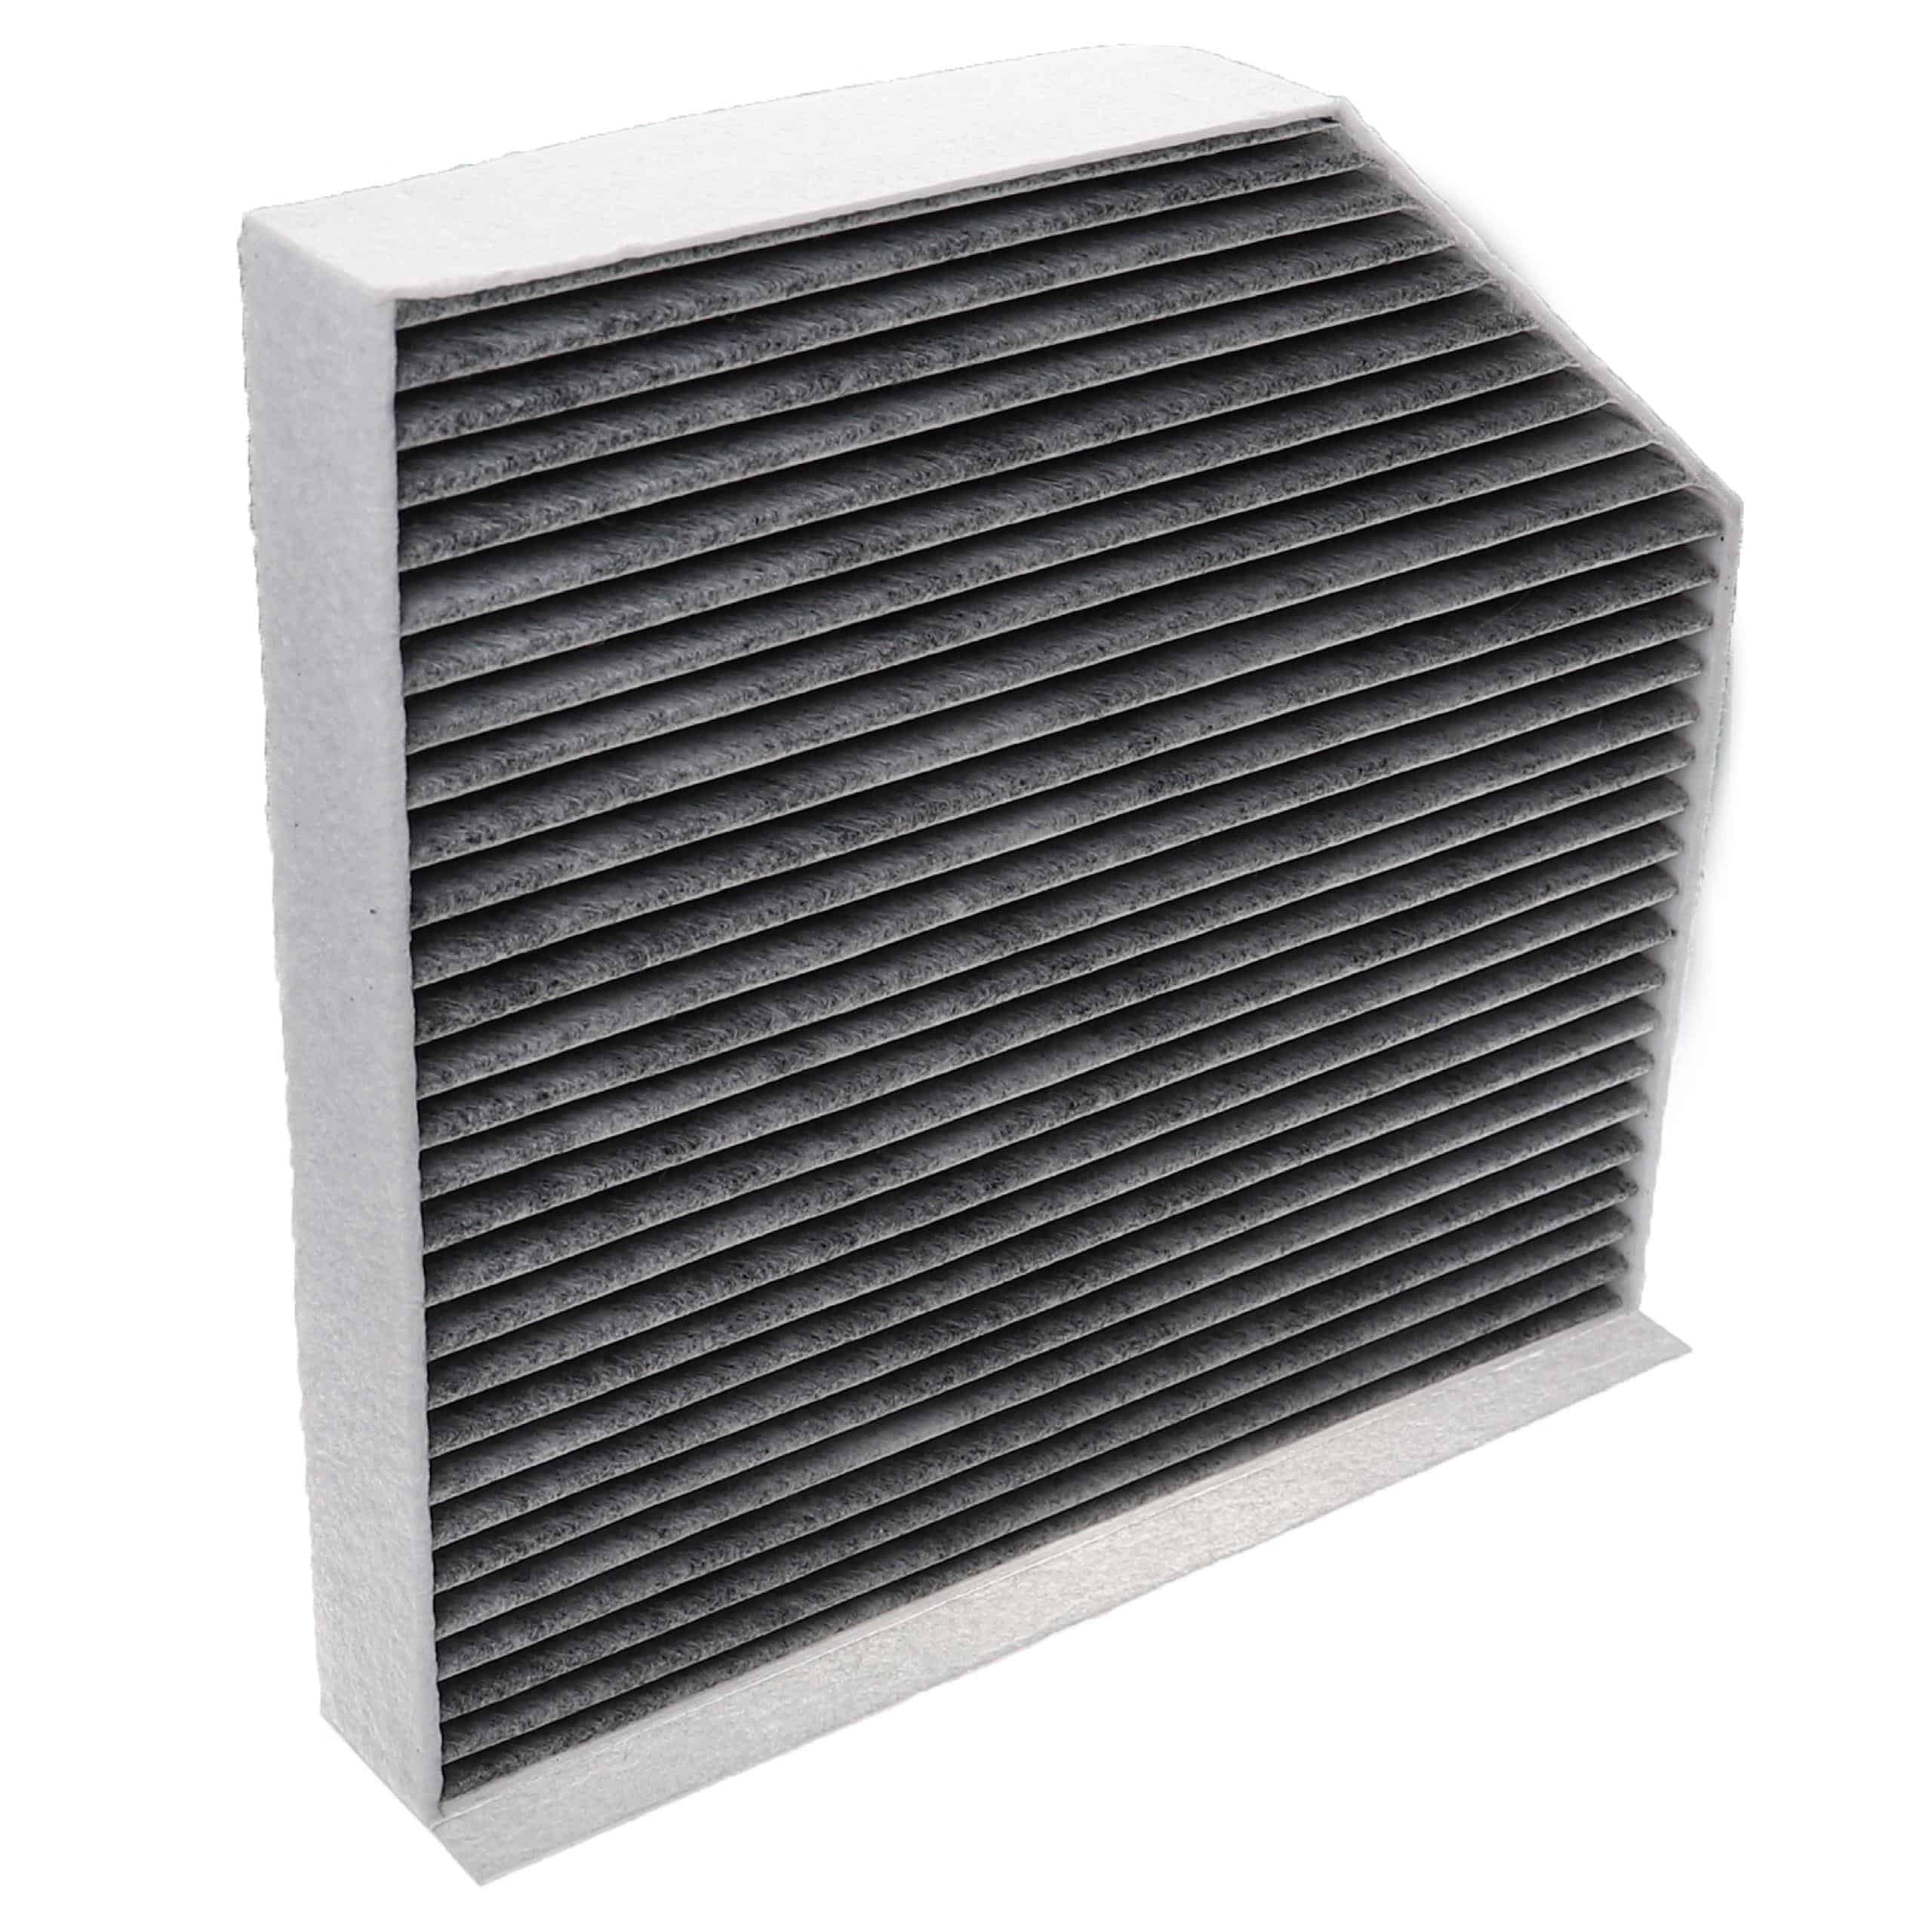 Cabin Air Filter replaces 1A First Automotive K30423 etc.